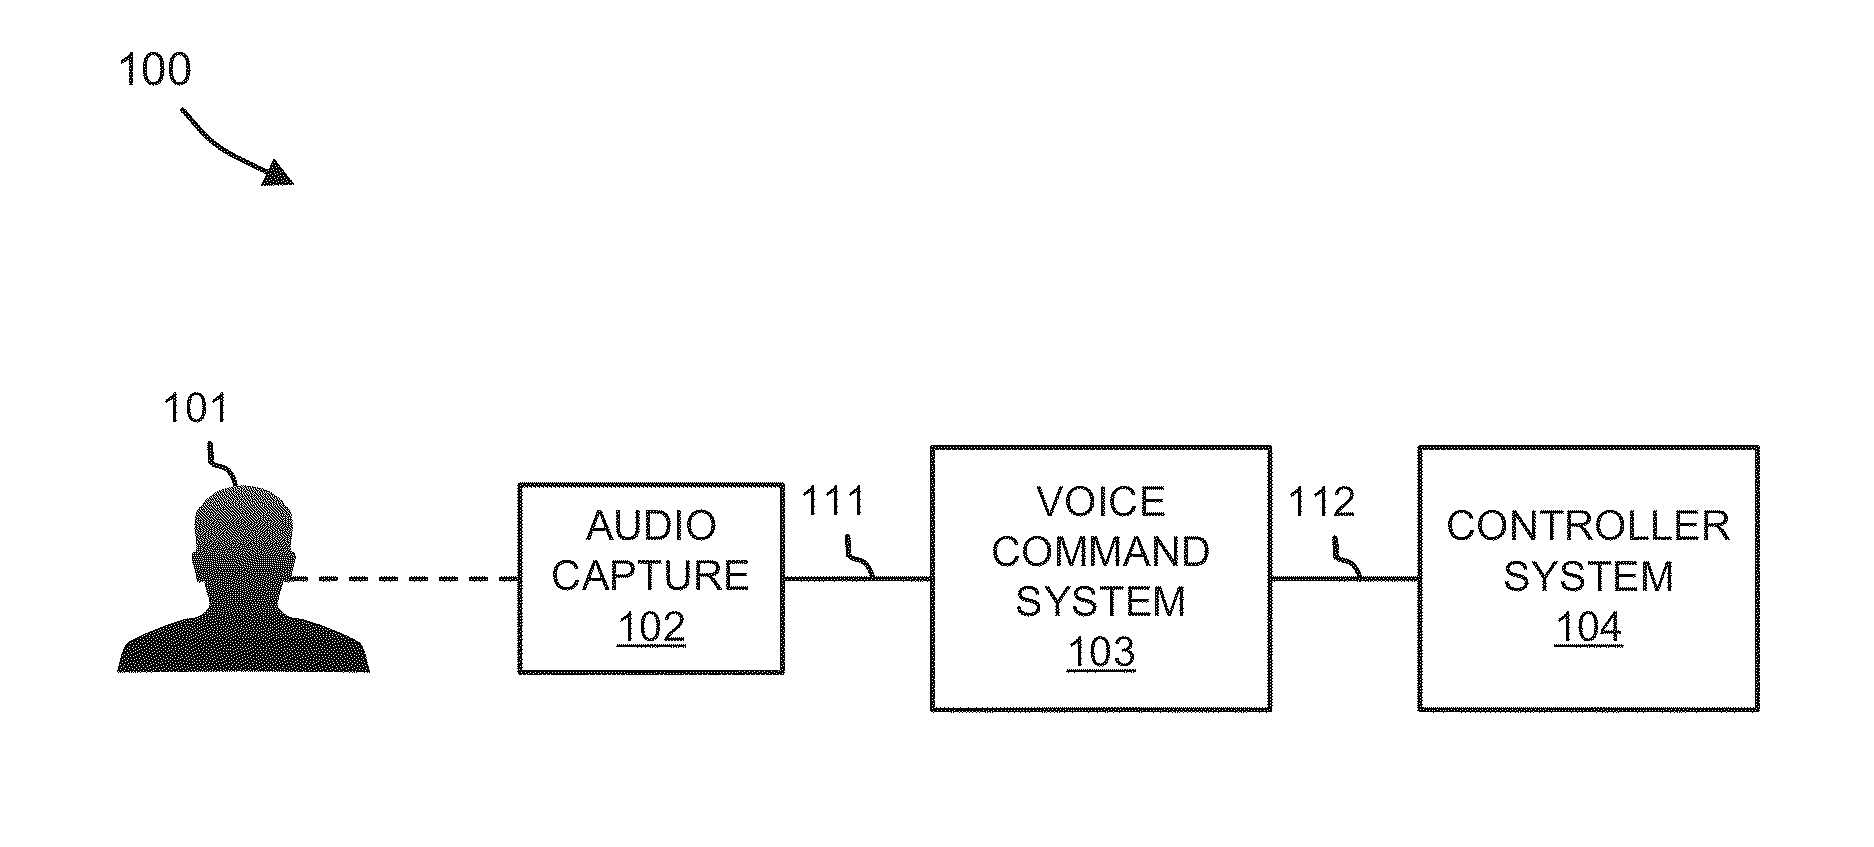 Integration of user orientation into a voice command system